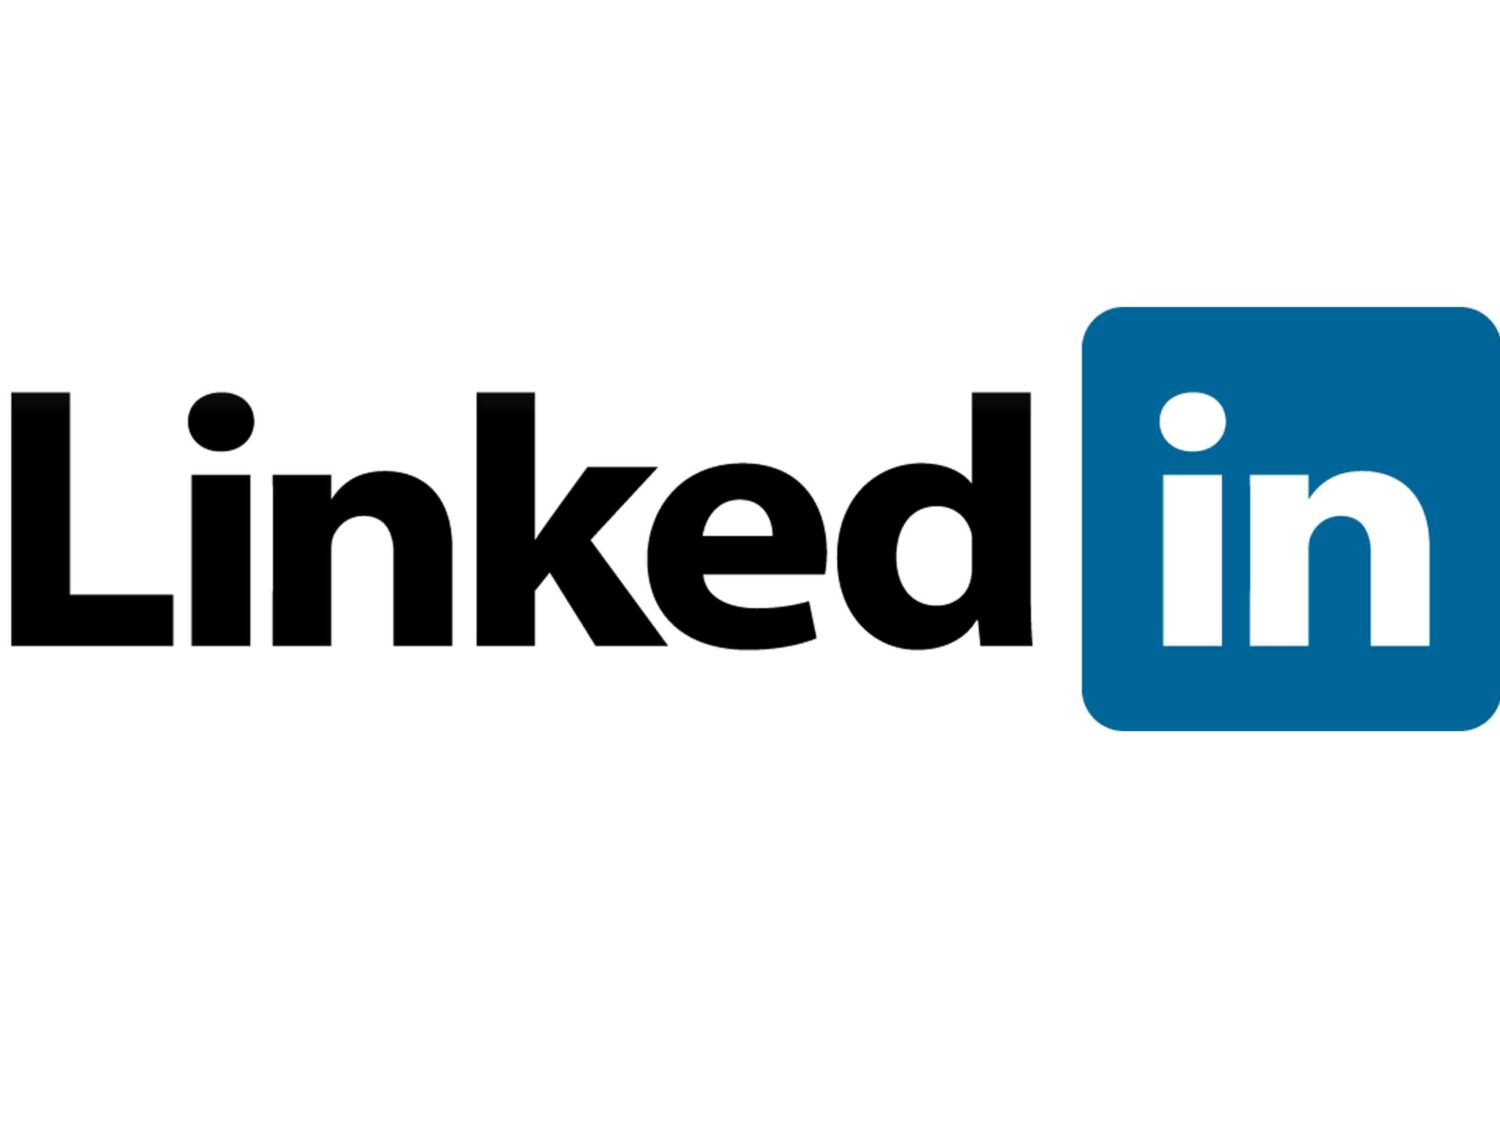 LinkedIn Launches Support to Accelerate COVID-19 Vaccine Distribution